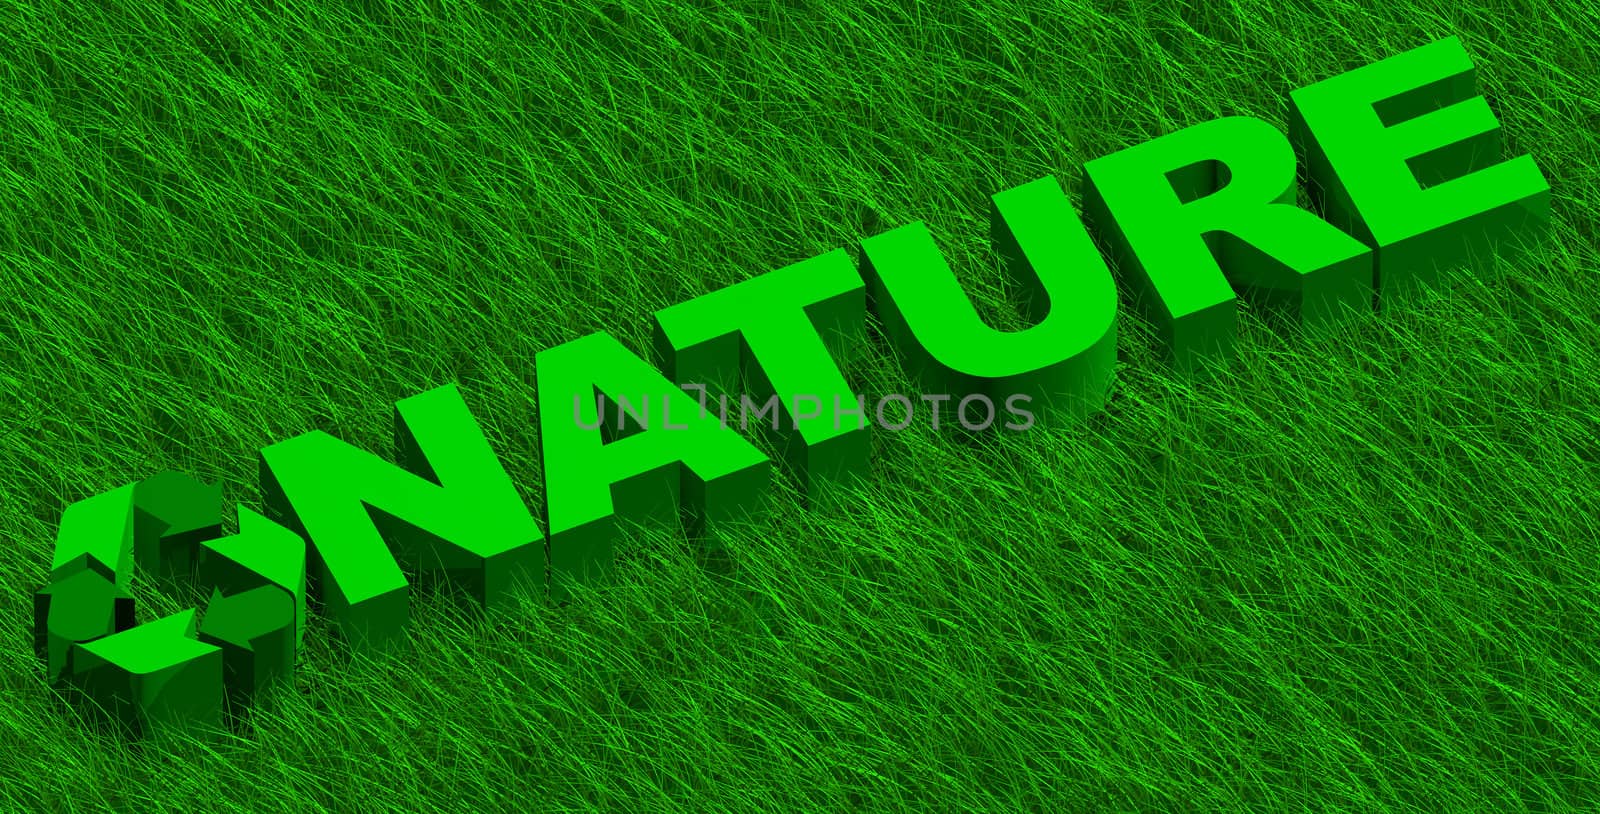 3D illustration of nature word over green grass